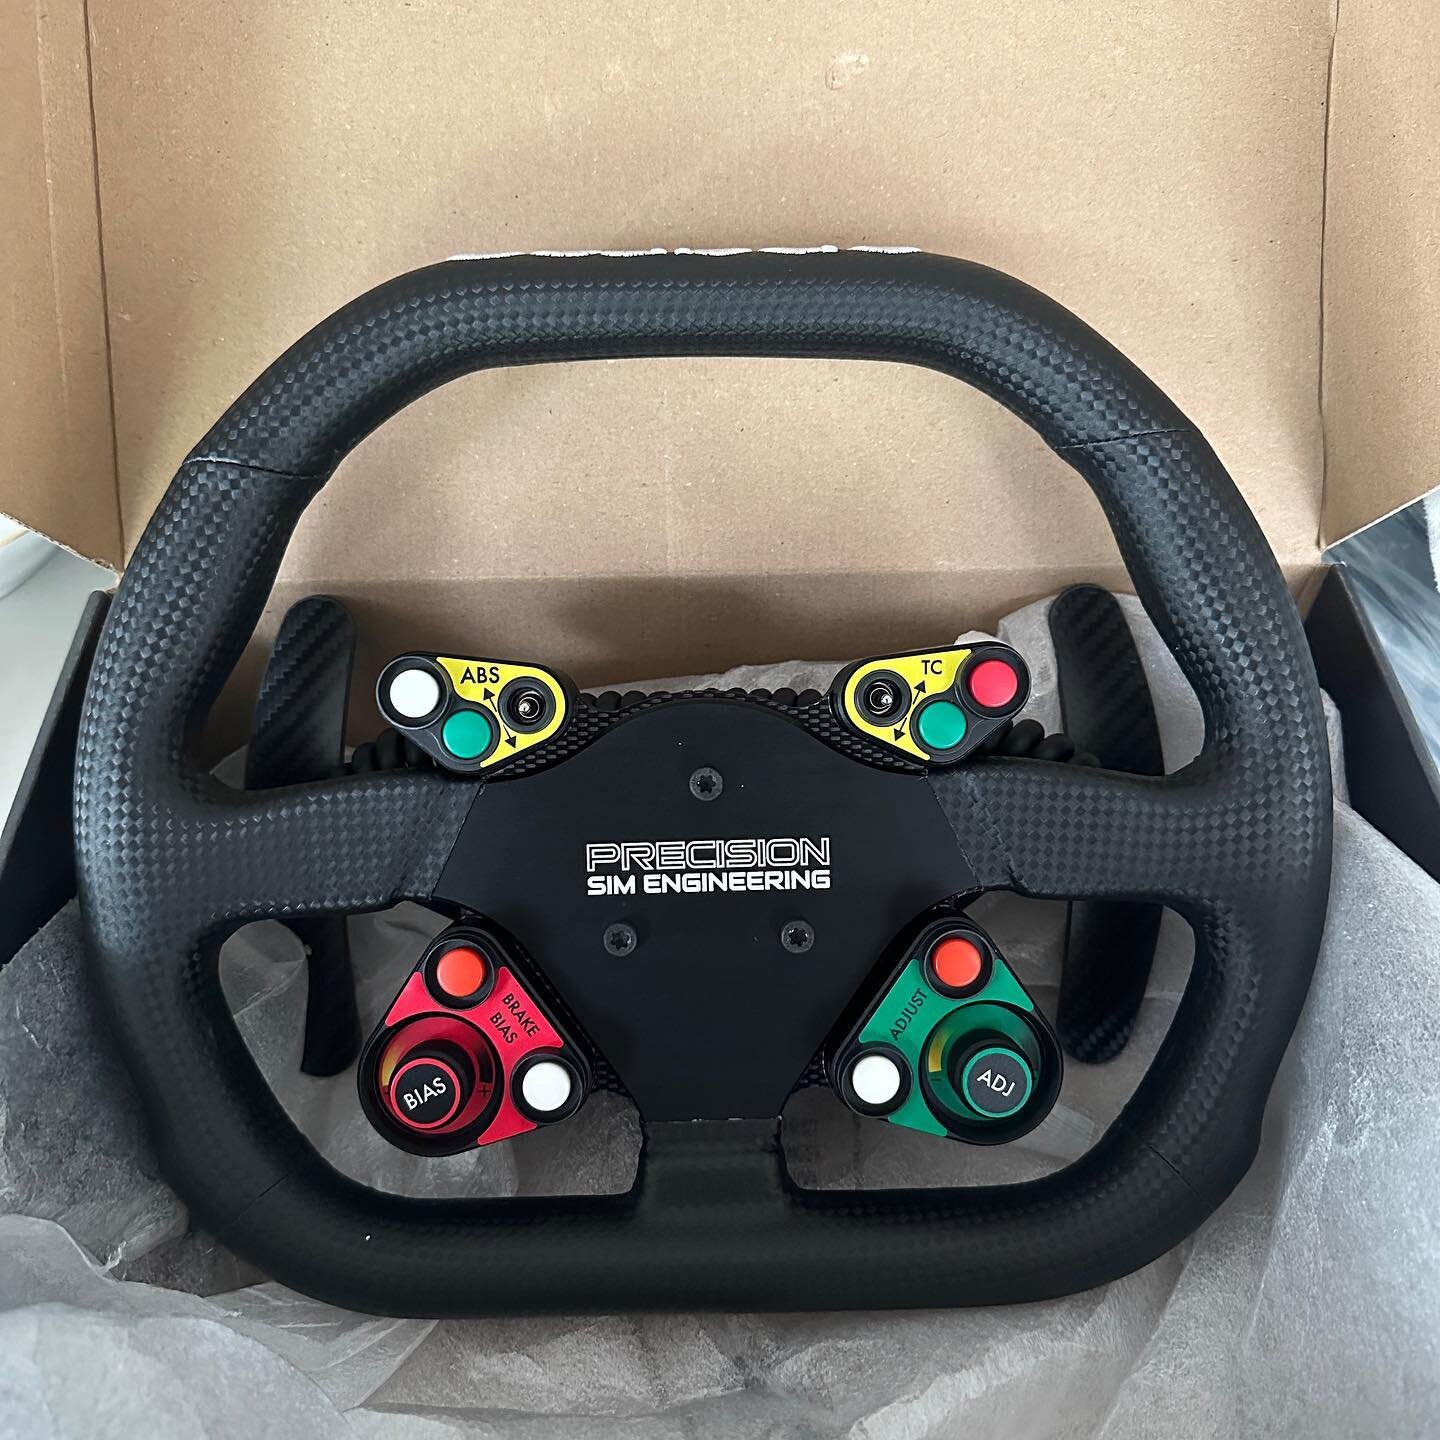 Congrats to our newest client Michael O who just grabbed this last remaining @precision_sim_engineering GT3 wheel we have in stock. This amazing wheel will be shipping to CA where Michael will put it to good use in his sim! 

Don&rsquo;t worry though